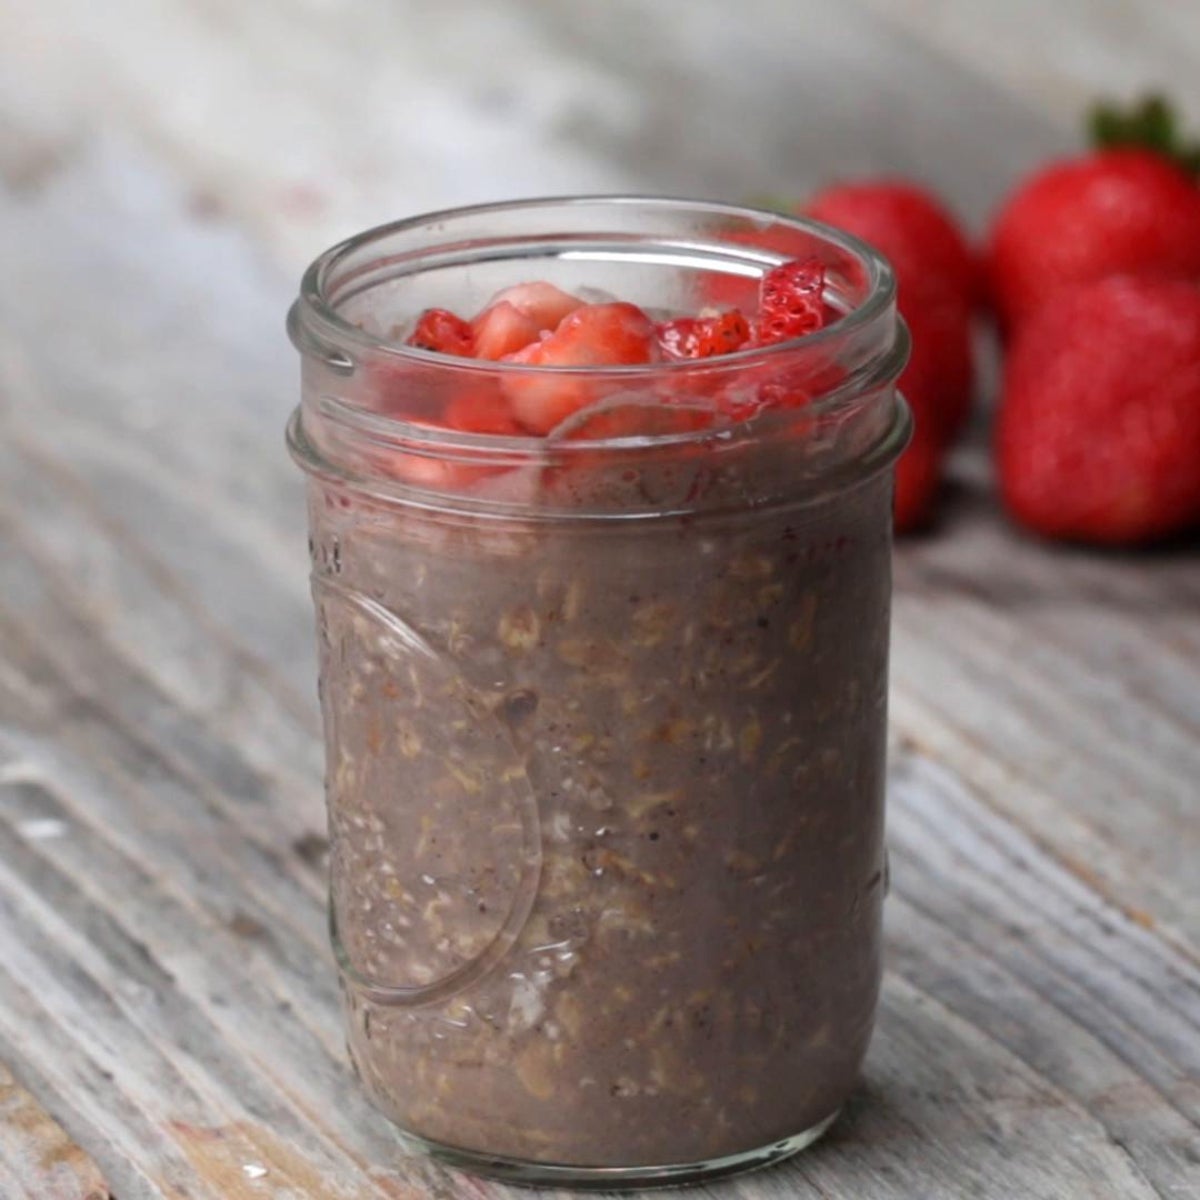 Chocolate Overnight Oats: Delicious & Healthy Breakfast